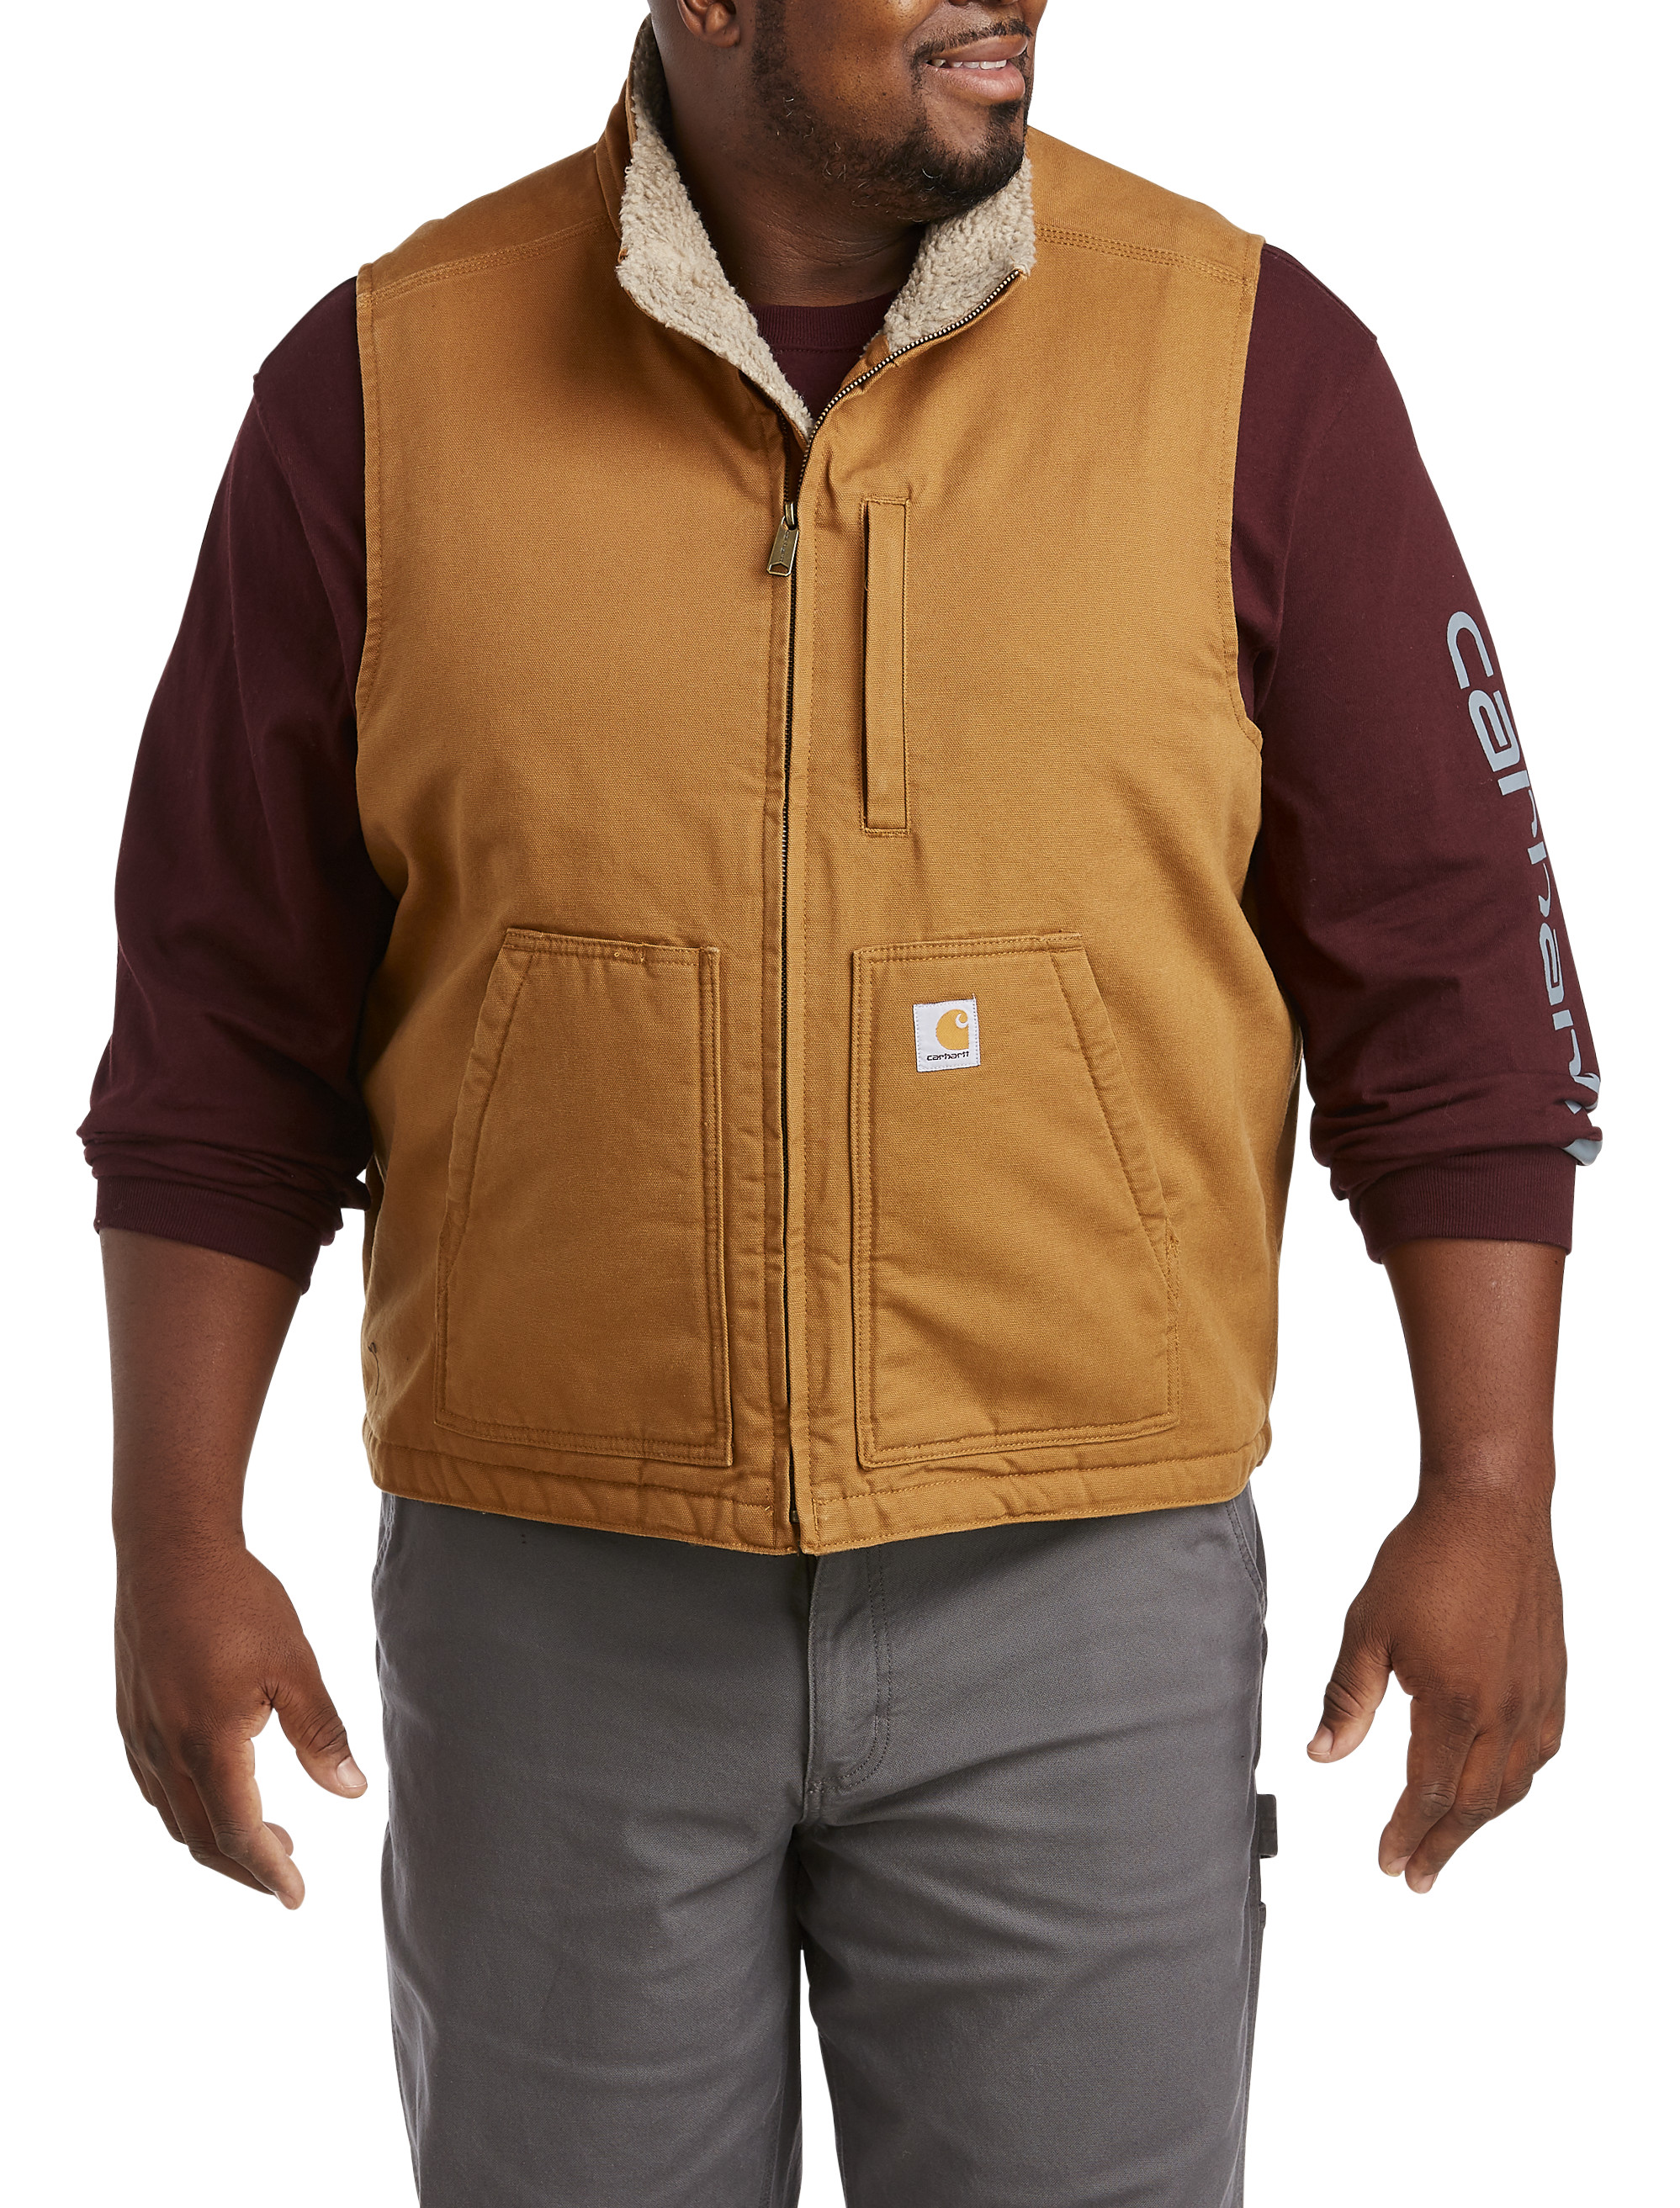 Men's Size 5XL Vest, Big and Tall